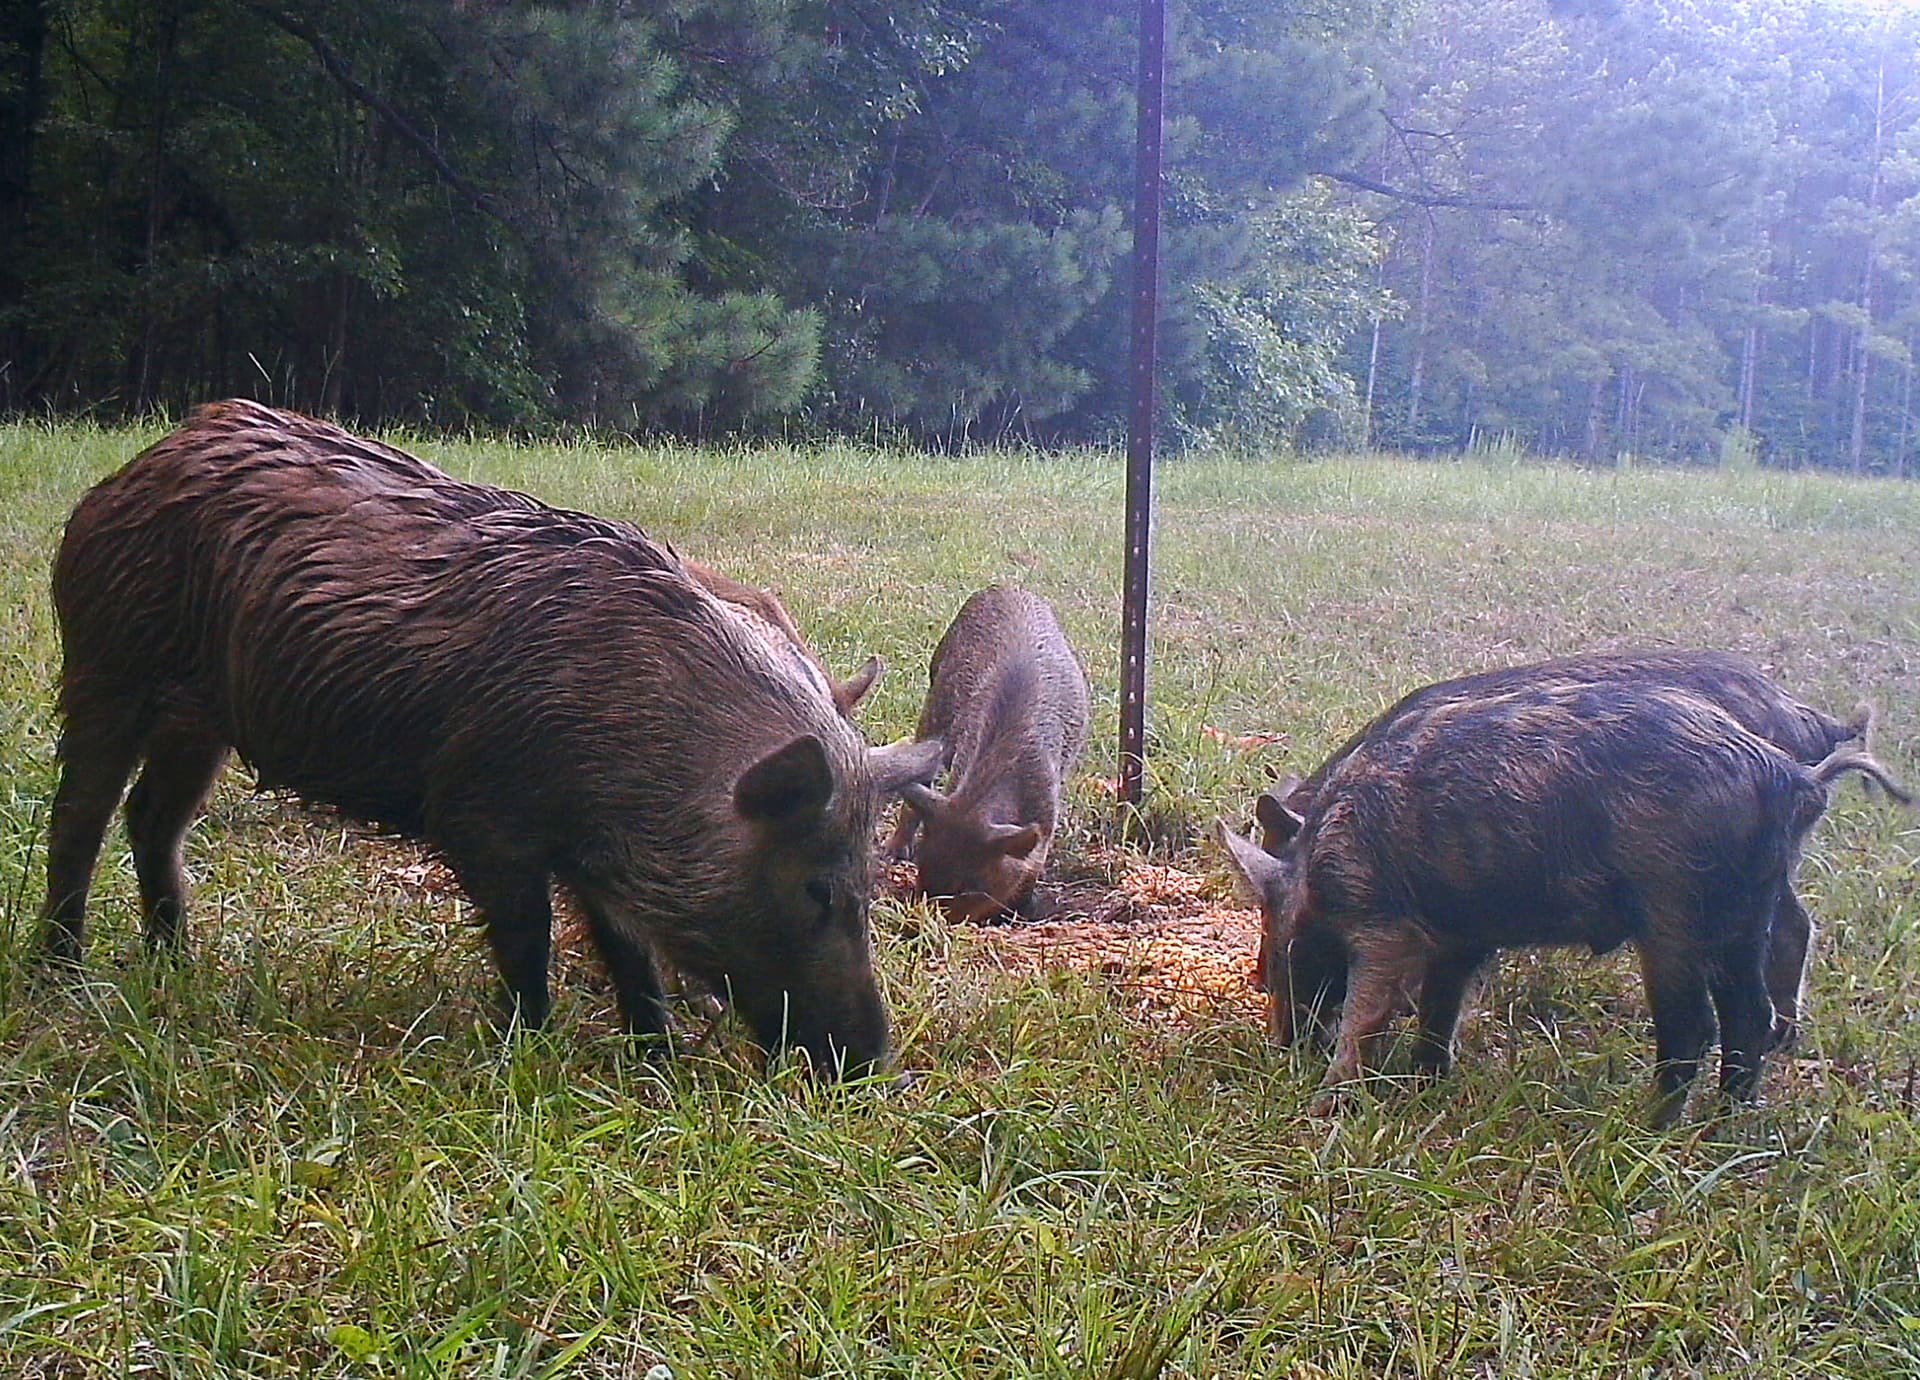 Can Anything Stop the Feral Hog Invasion?